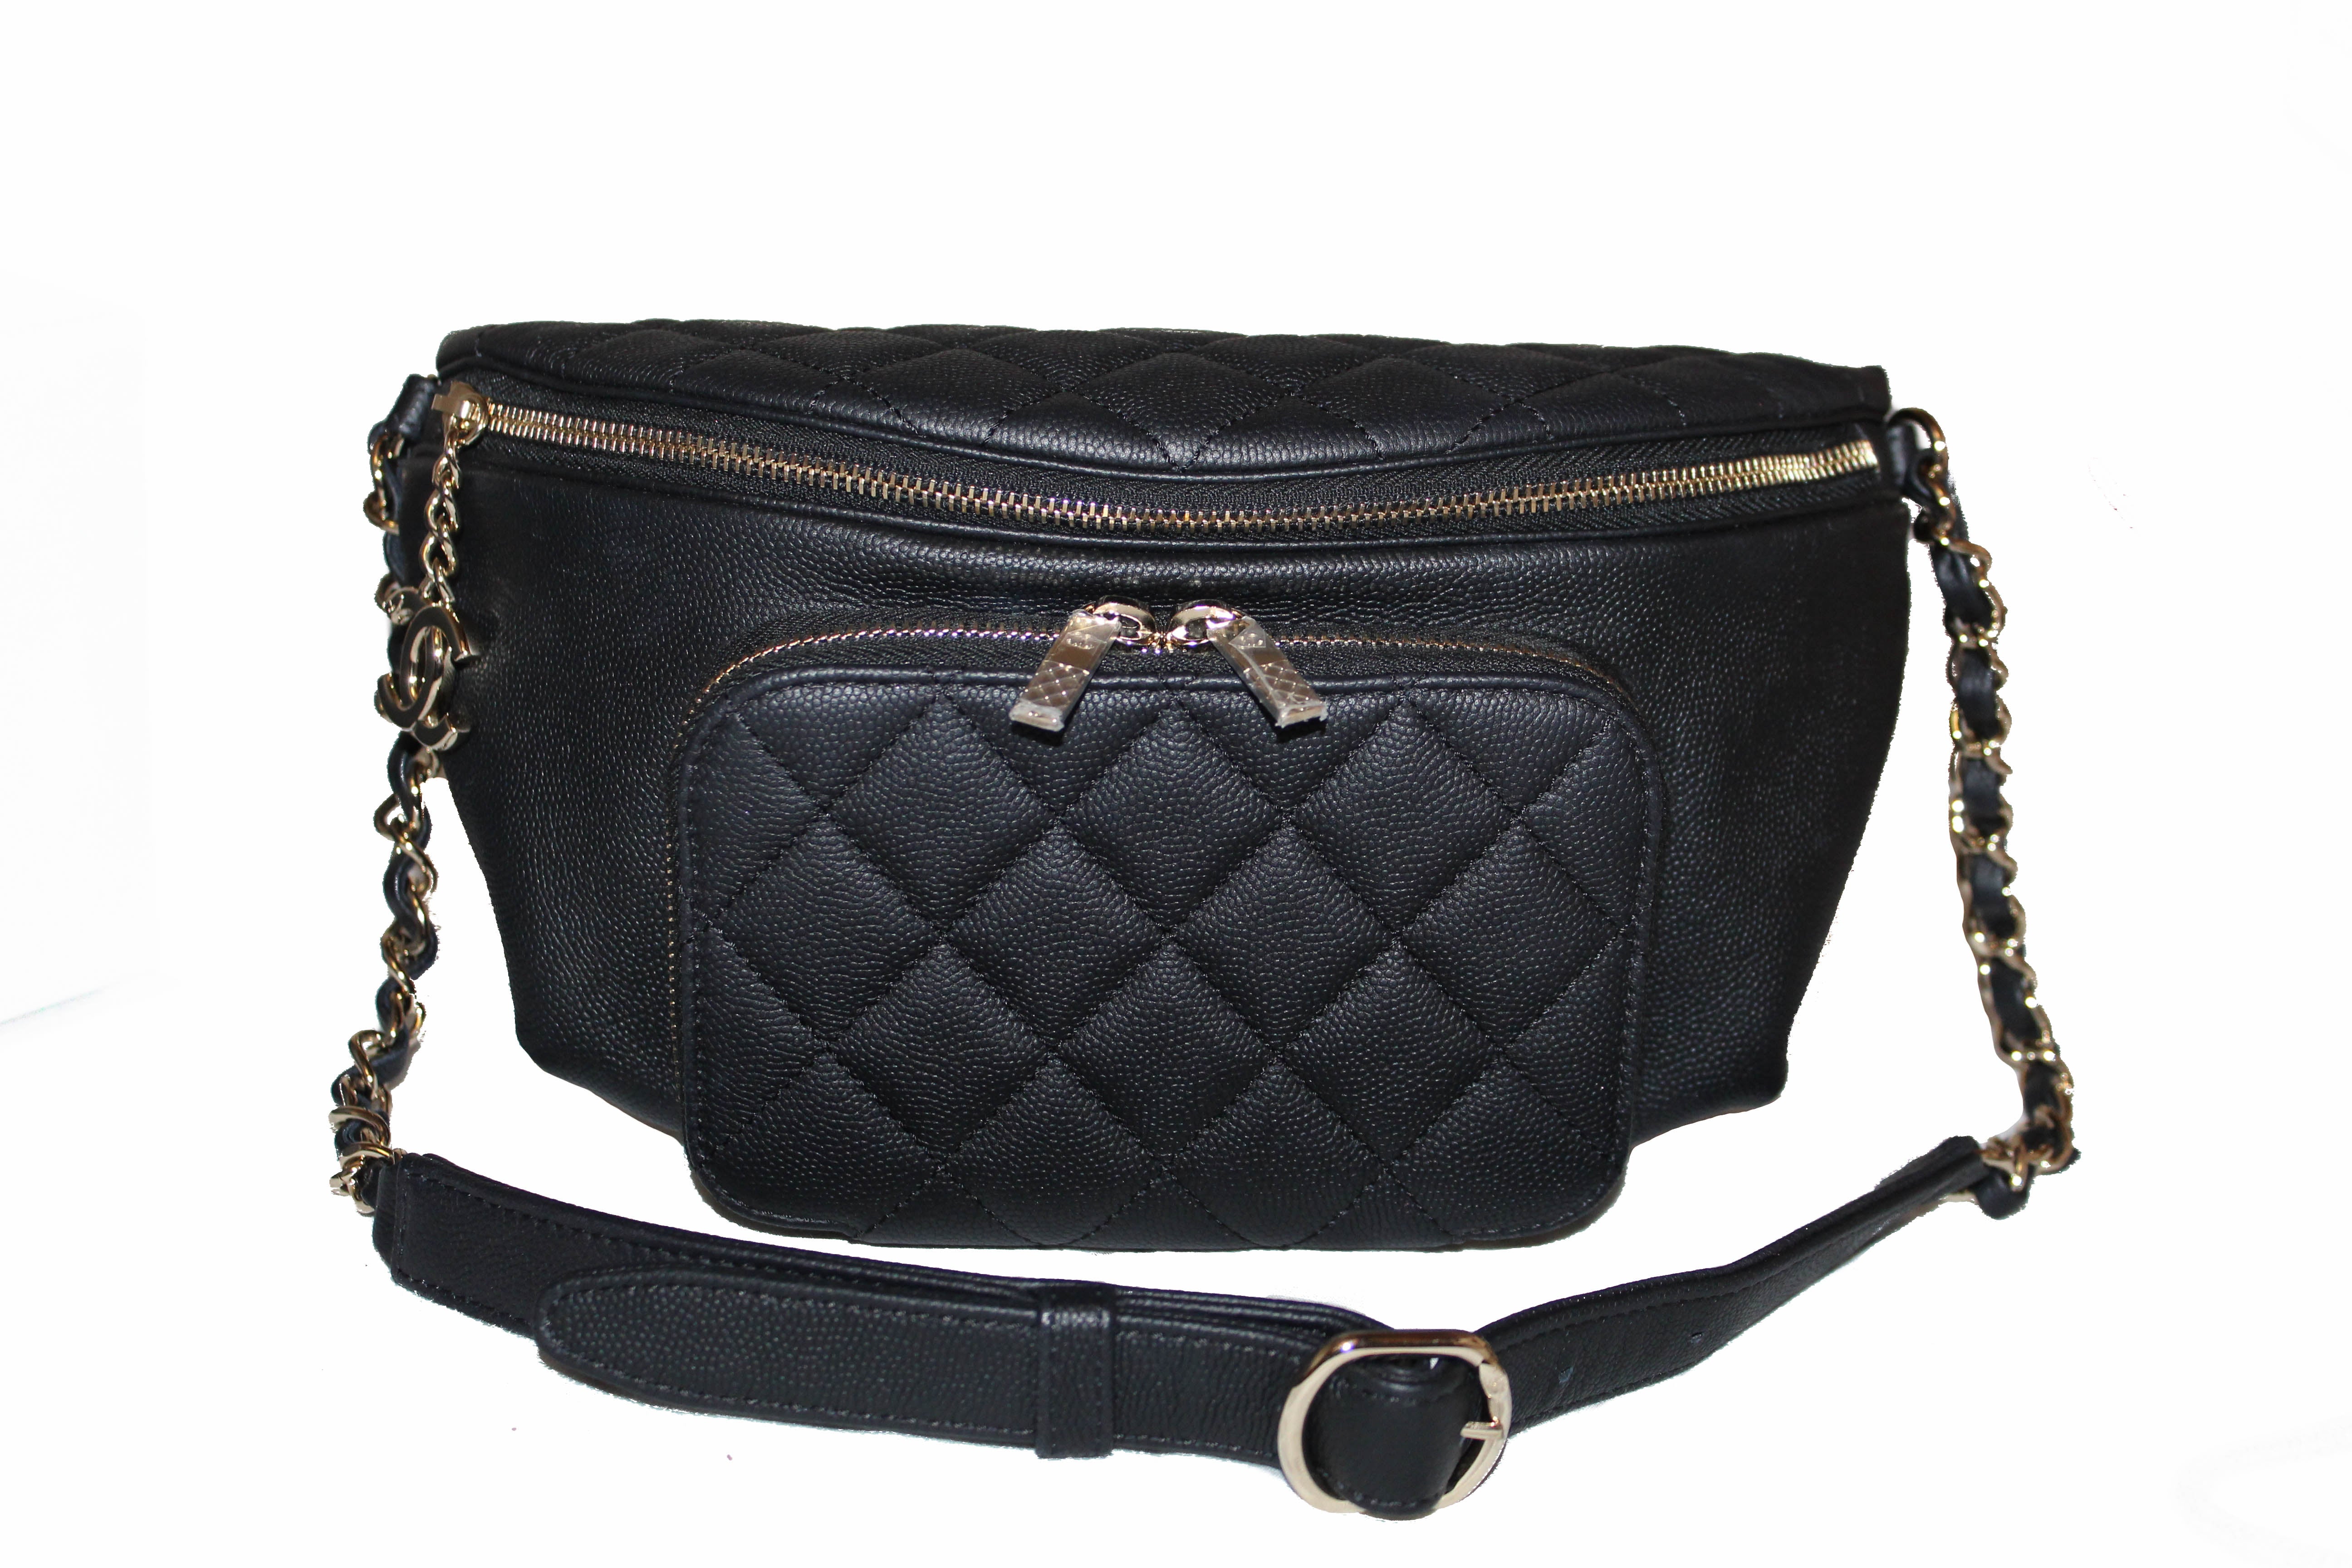 Authentic Chanel Black Small Quilted Caviar Leather Business